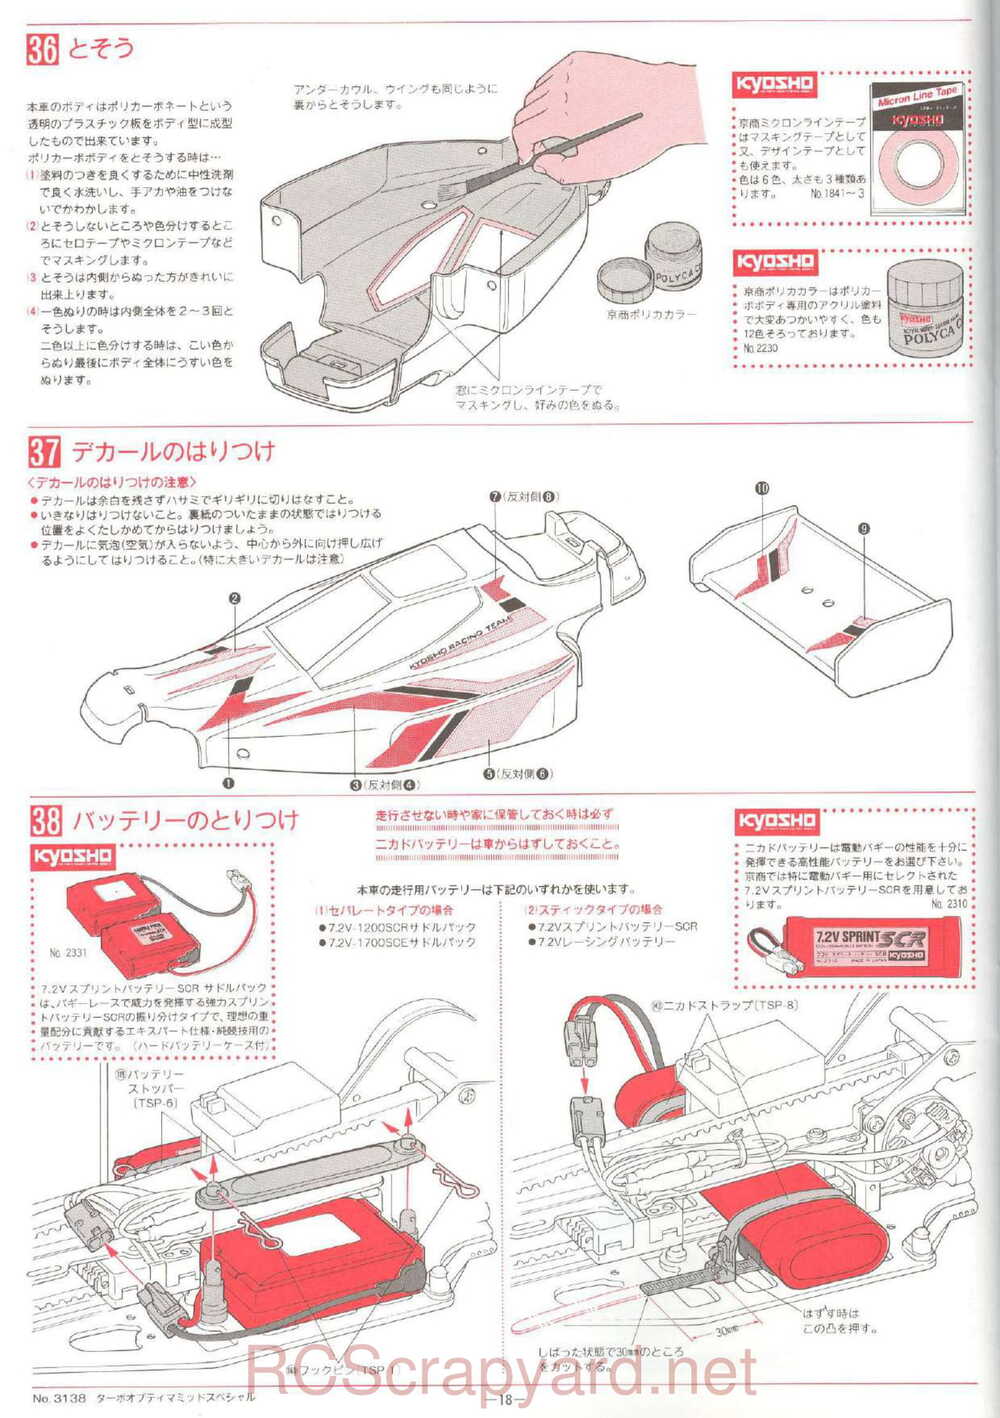 Kyosho - 3138 - Turbo-Optima-Mid-Special - Manual - Page 18